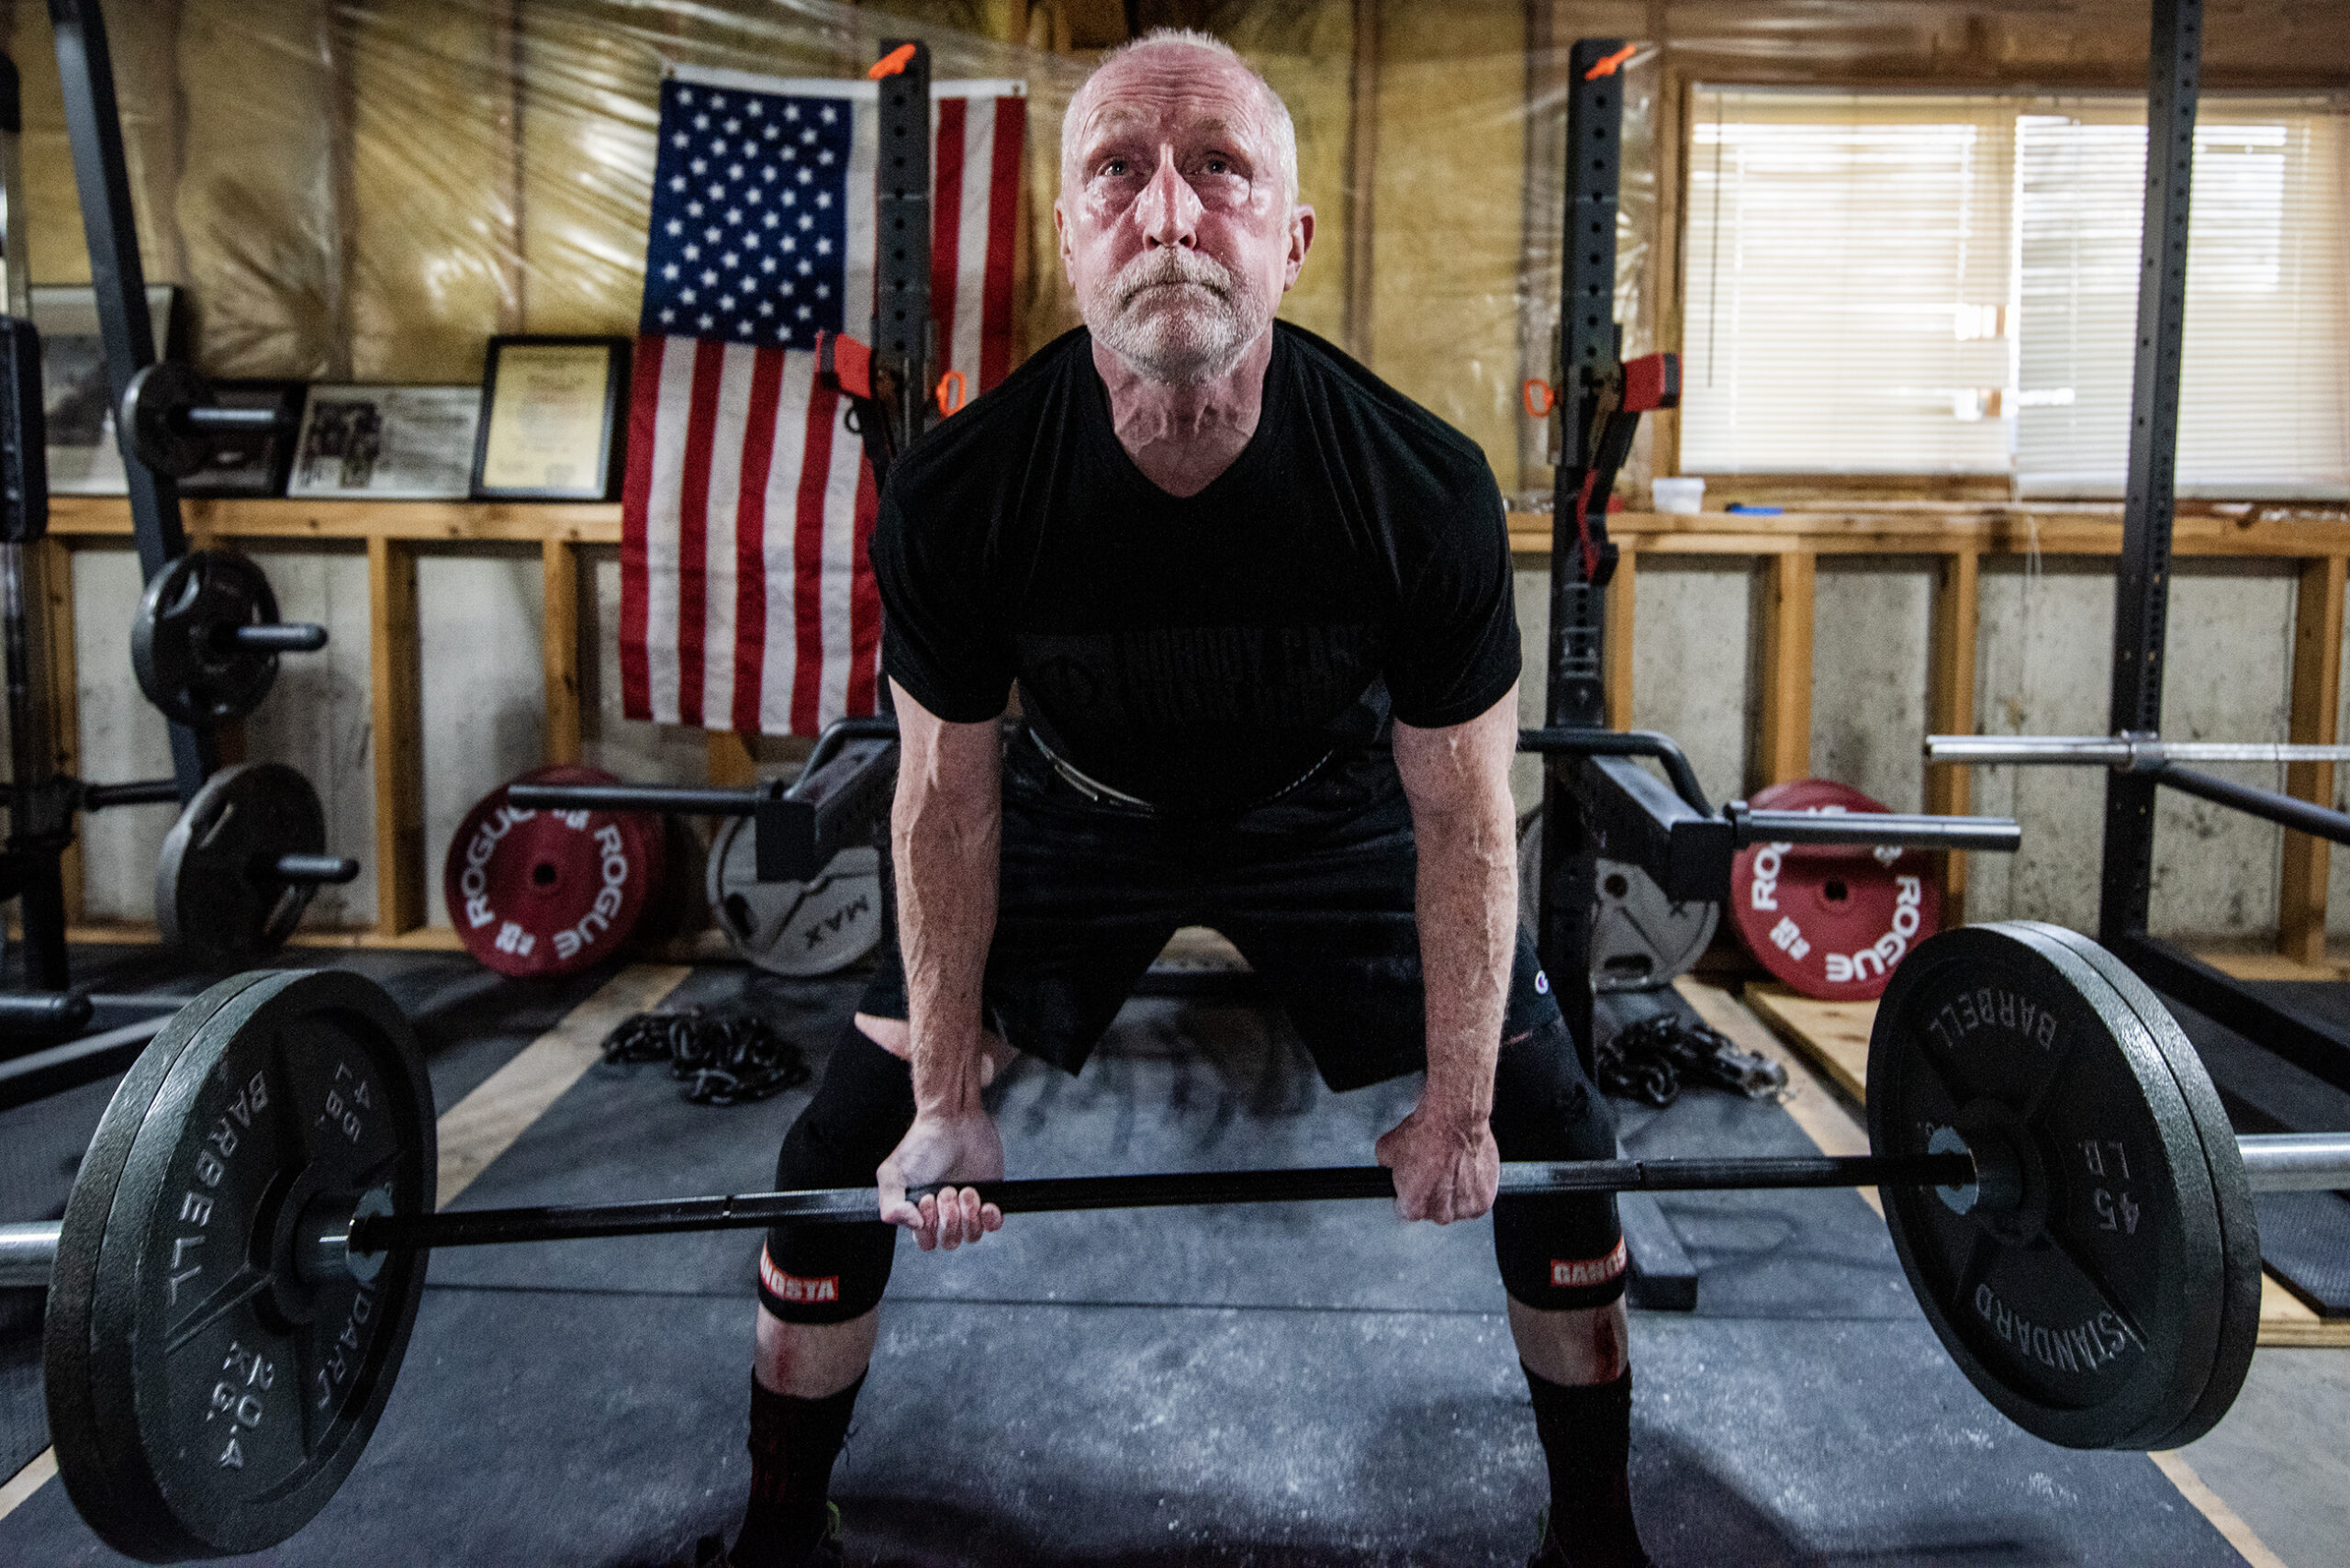 After quintuple bypass heart surgery, Wisconsin powerlifter eyes 500-pound record this year